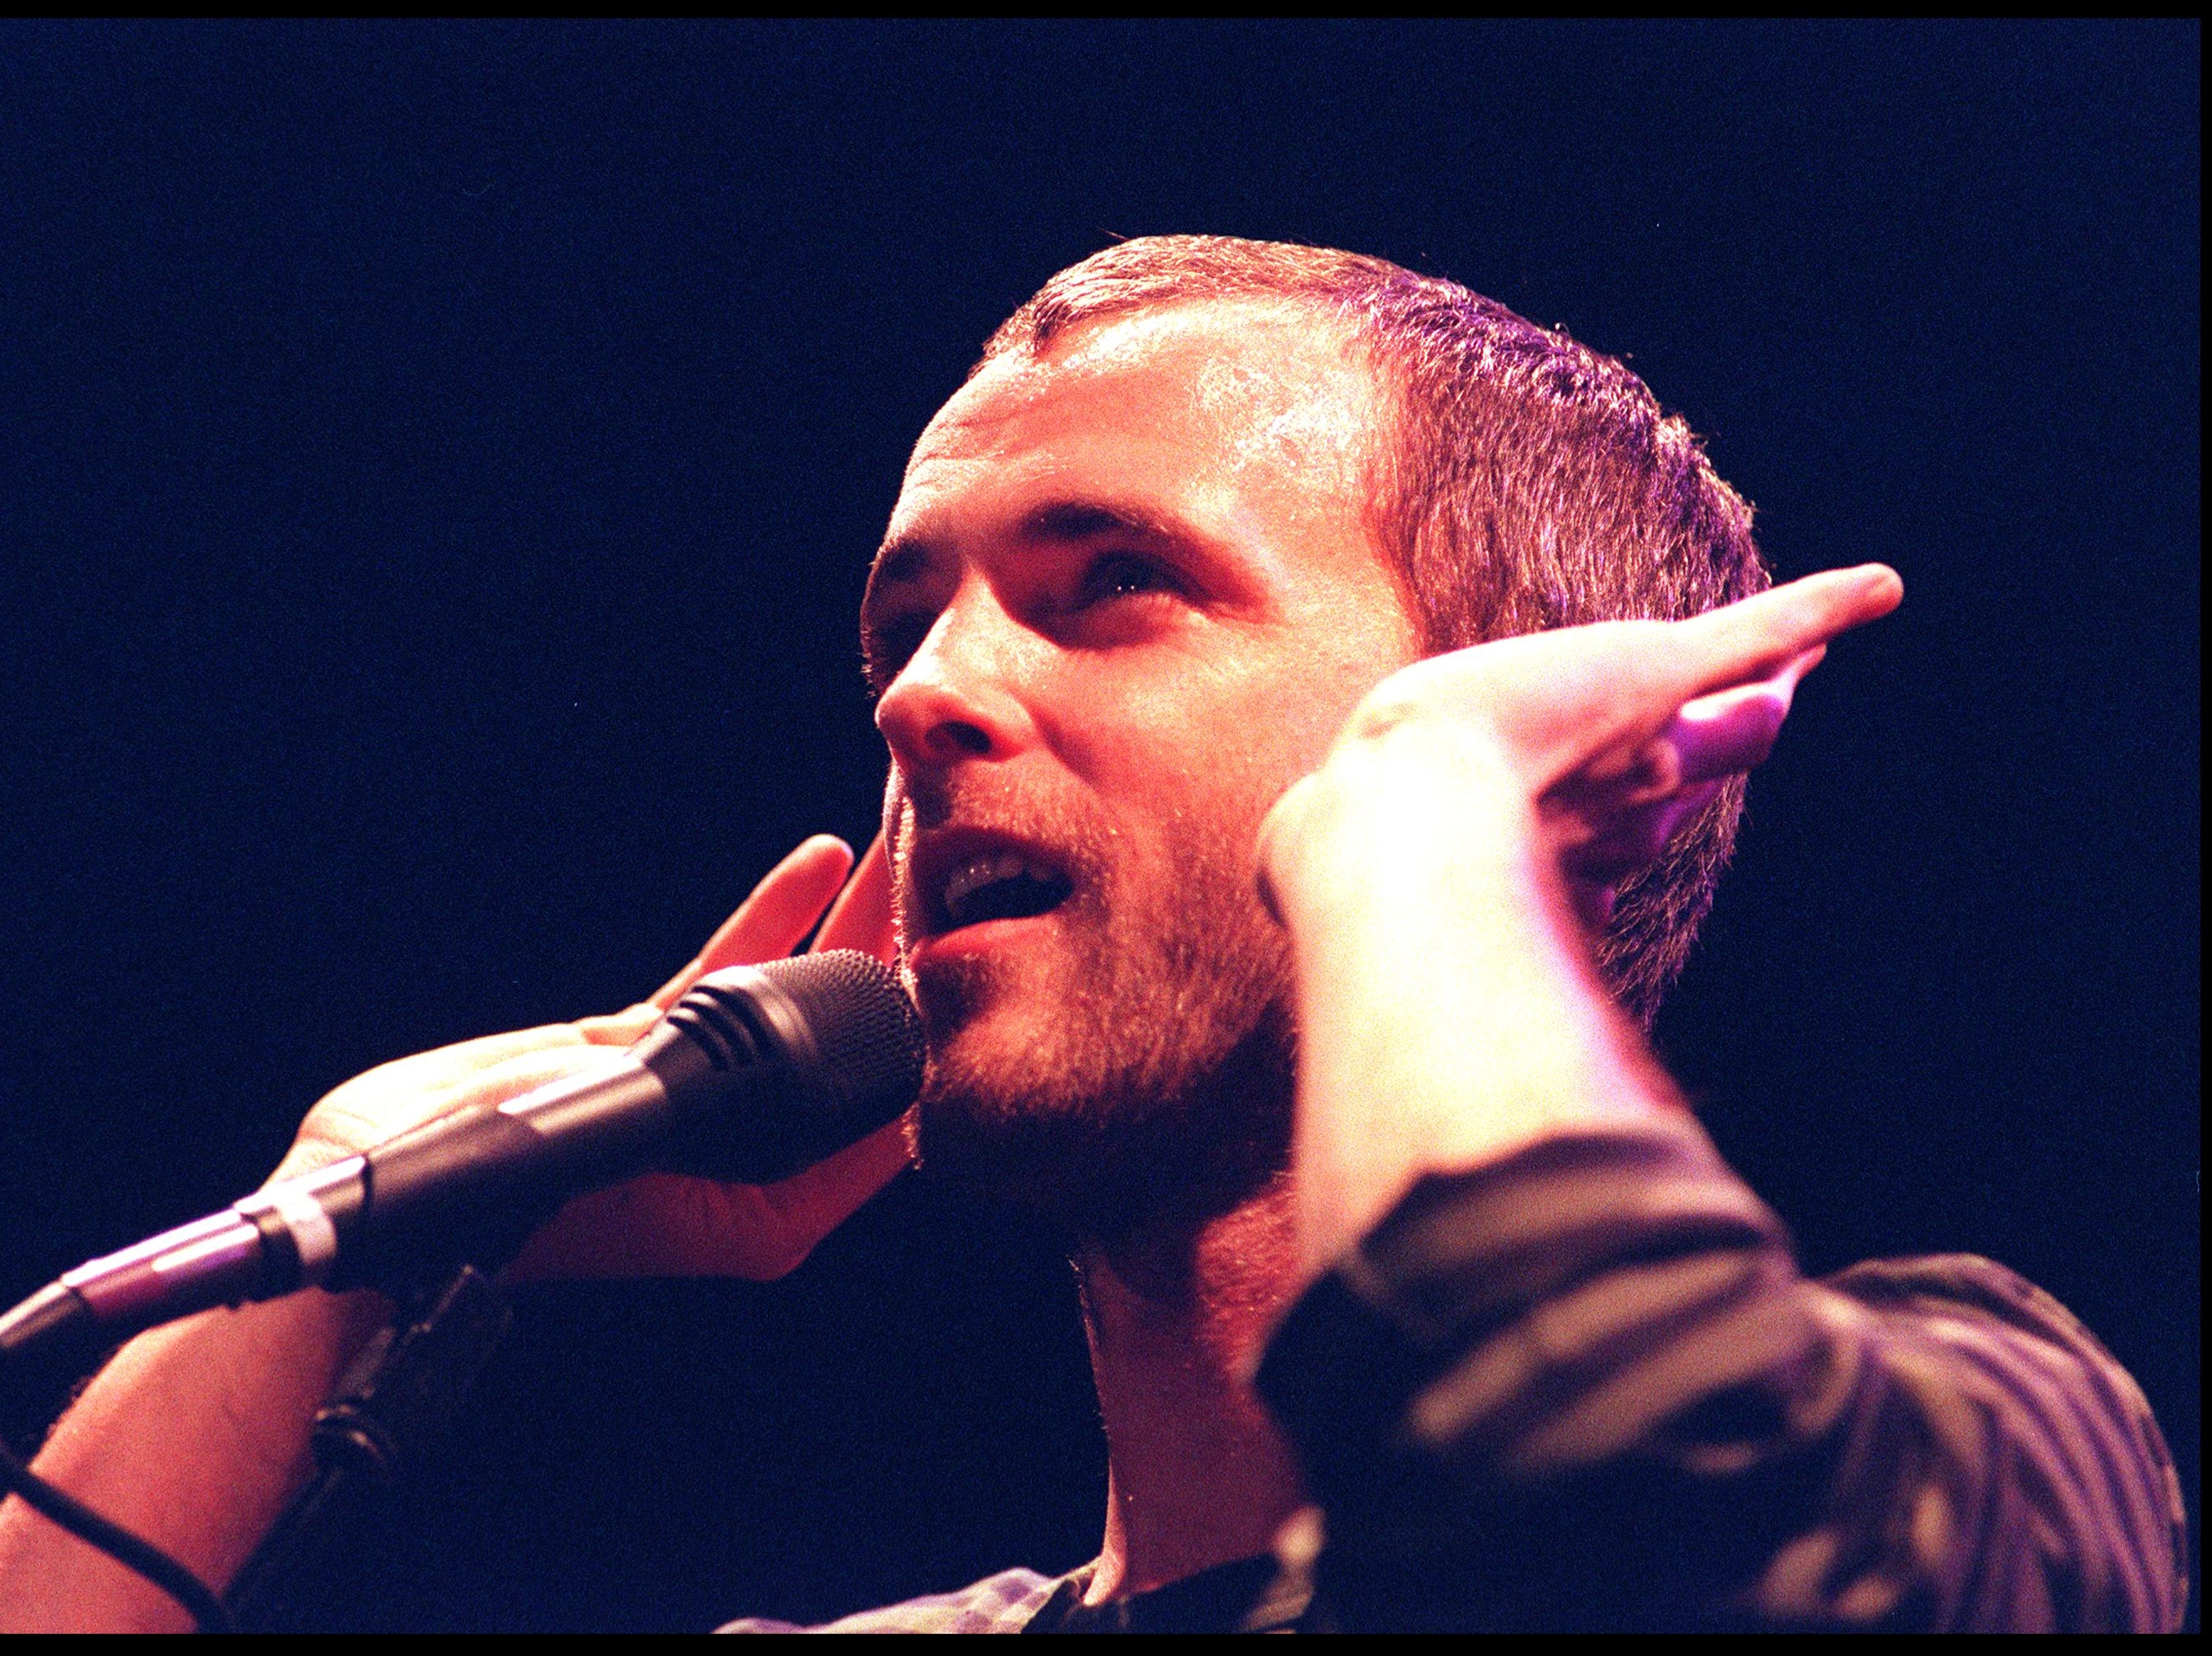 Fran Healy of Travis performing at the Wiltern Theater, Los Angeles, 2000